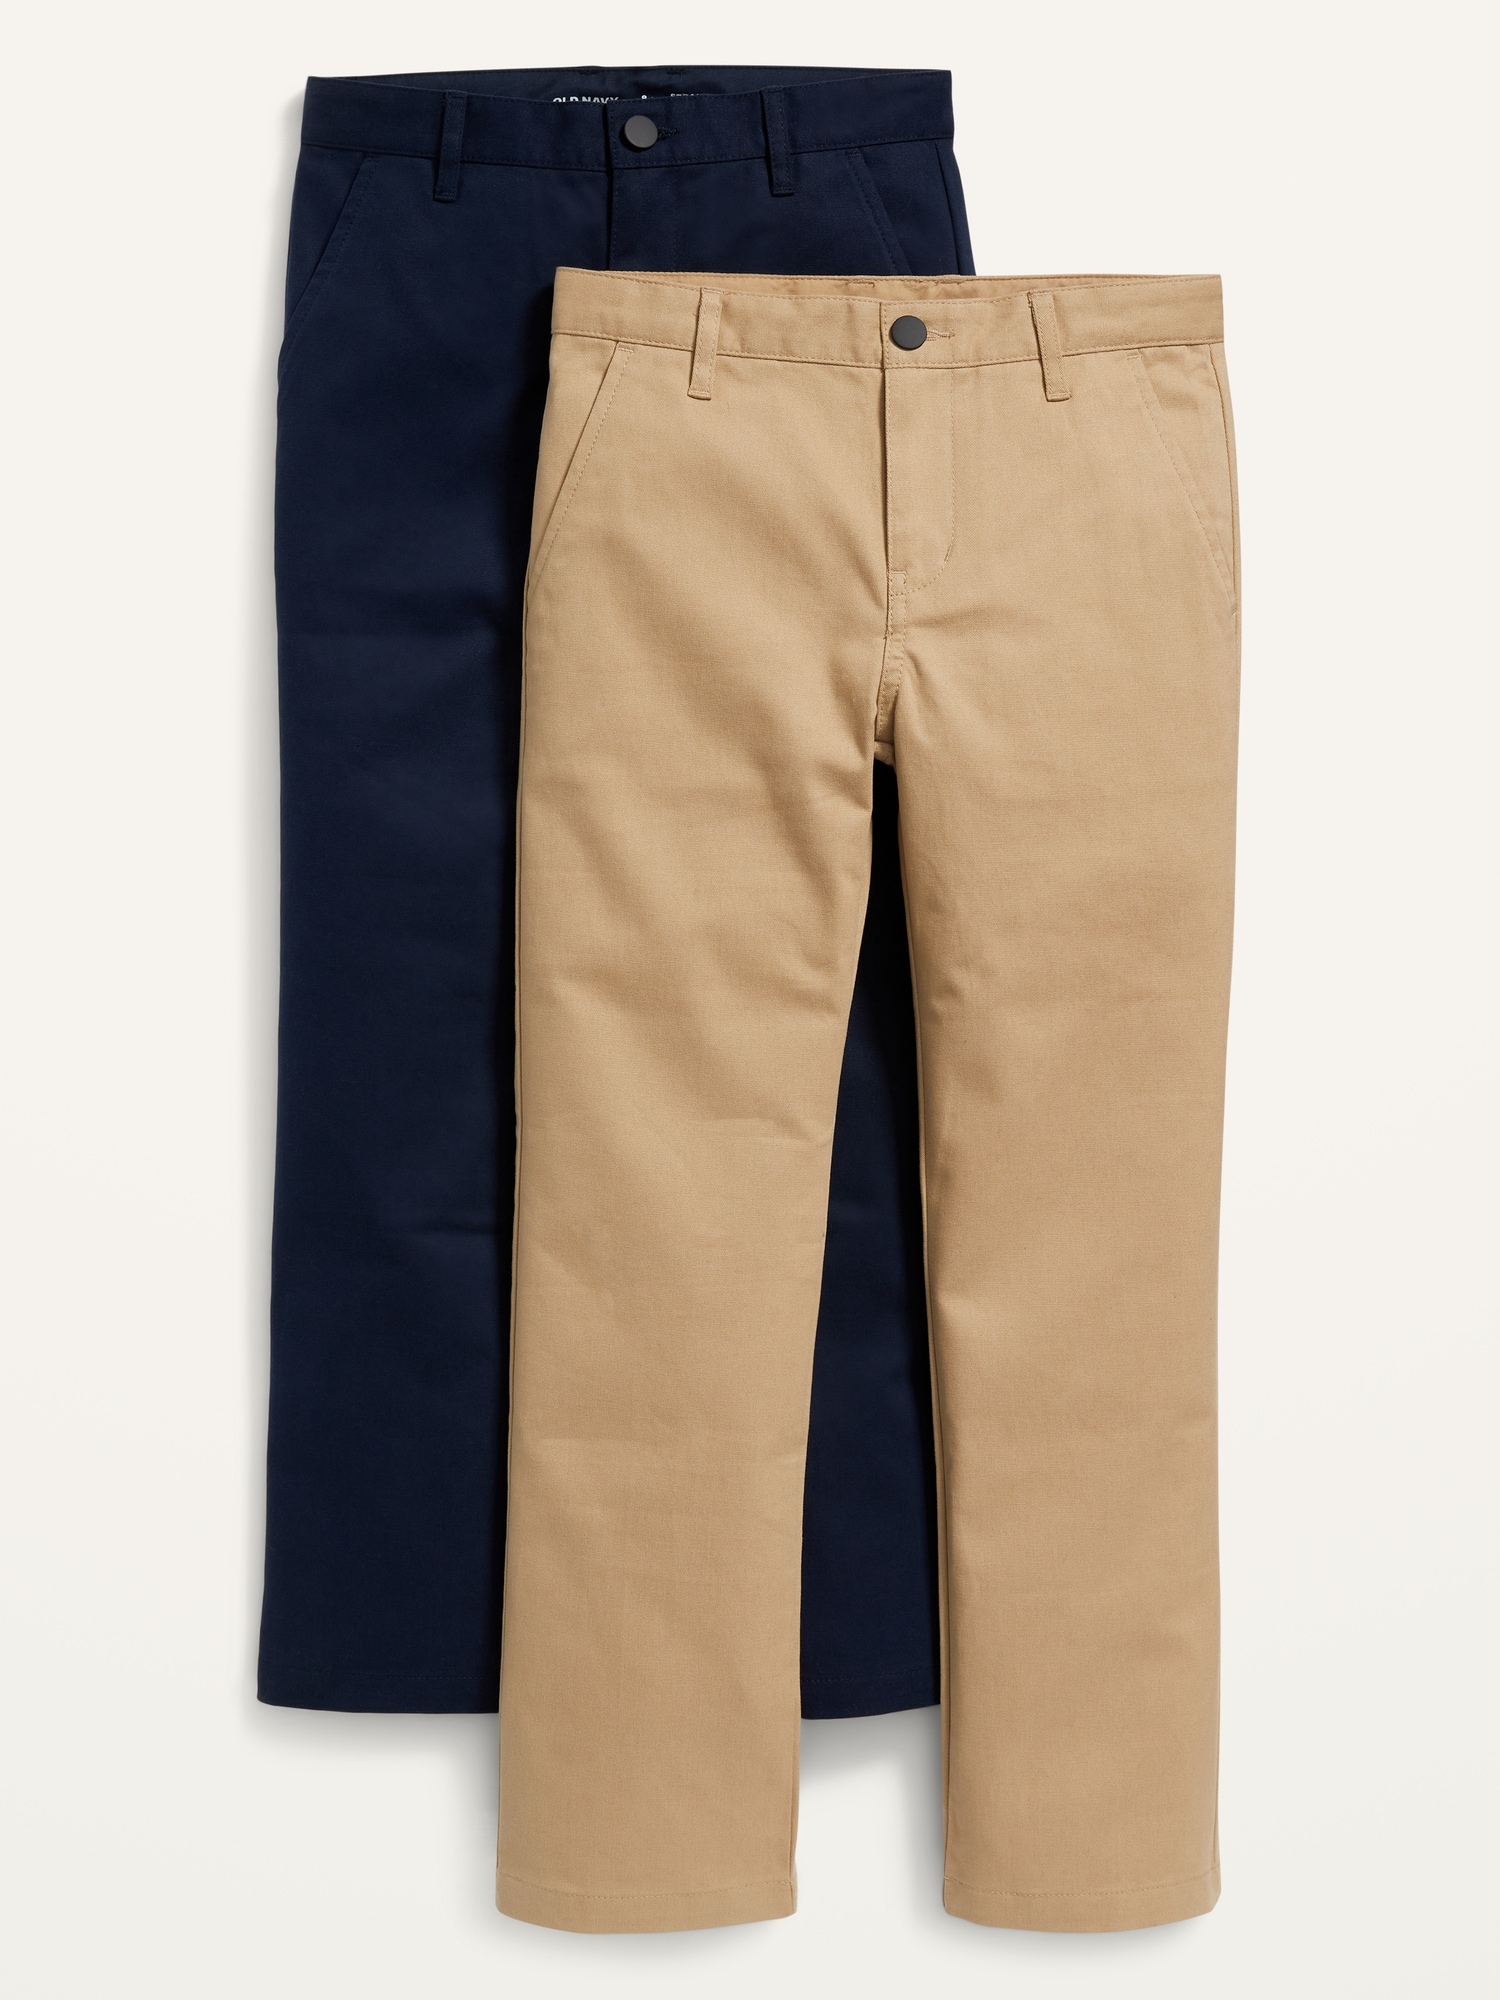 Old Navy Uniform Straight Pants 2-Pack For Boys multi. 1